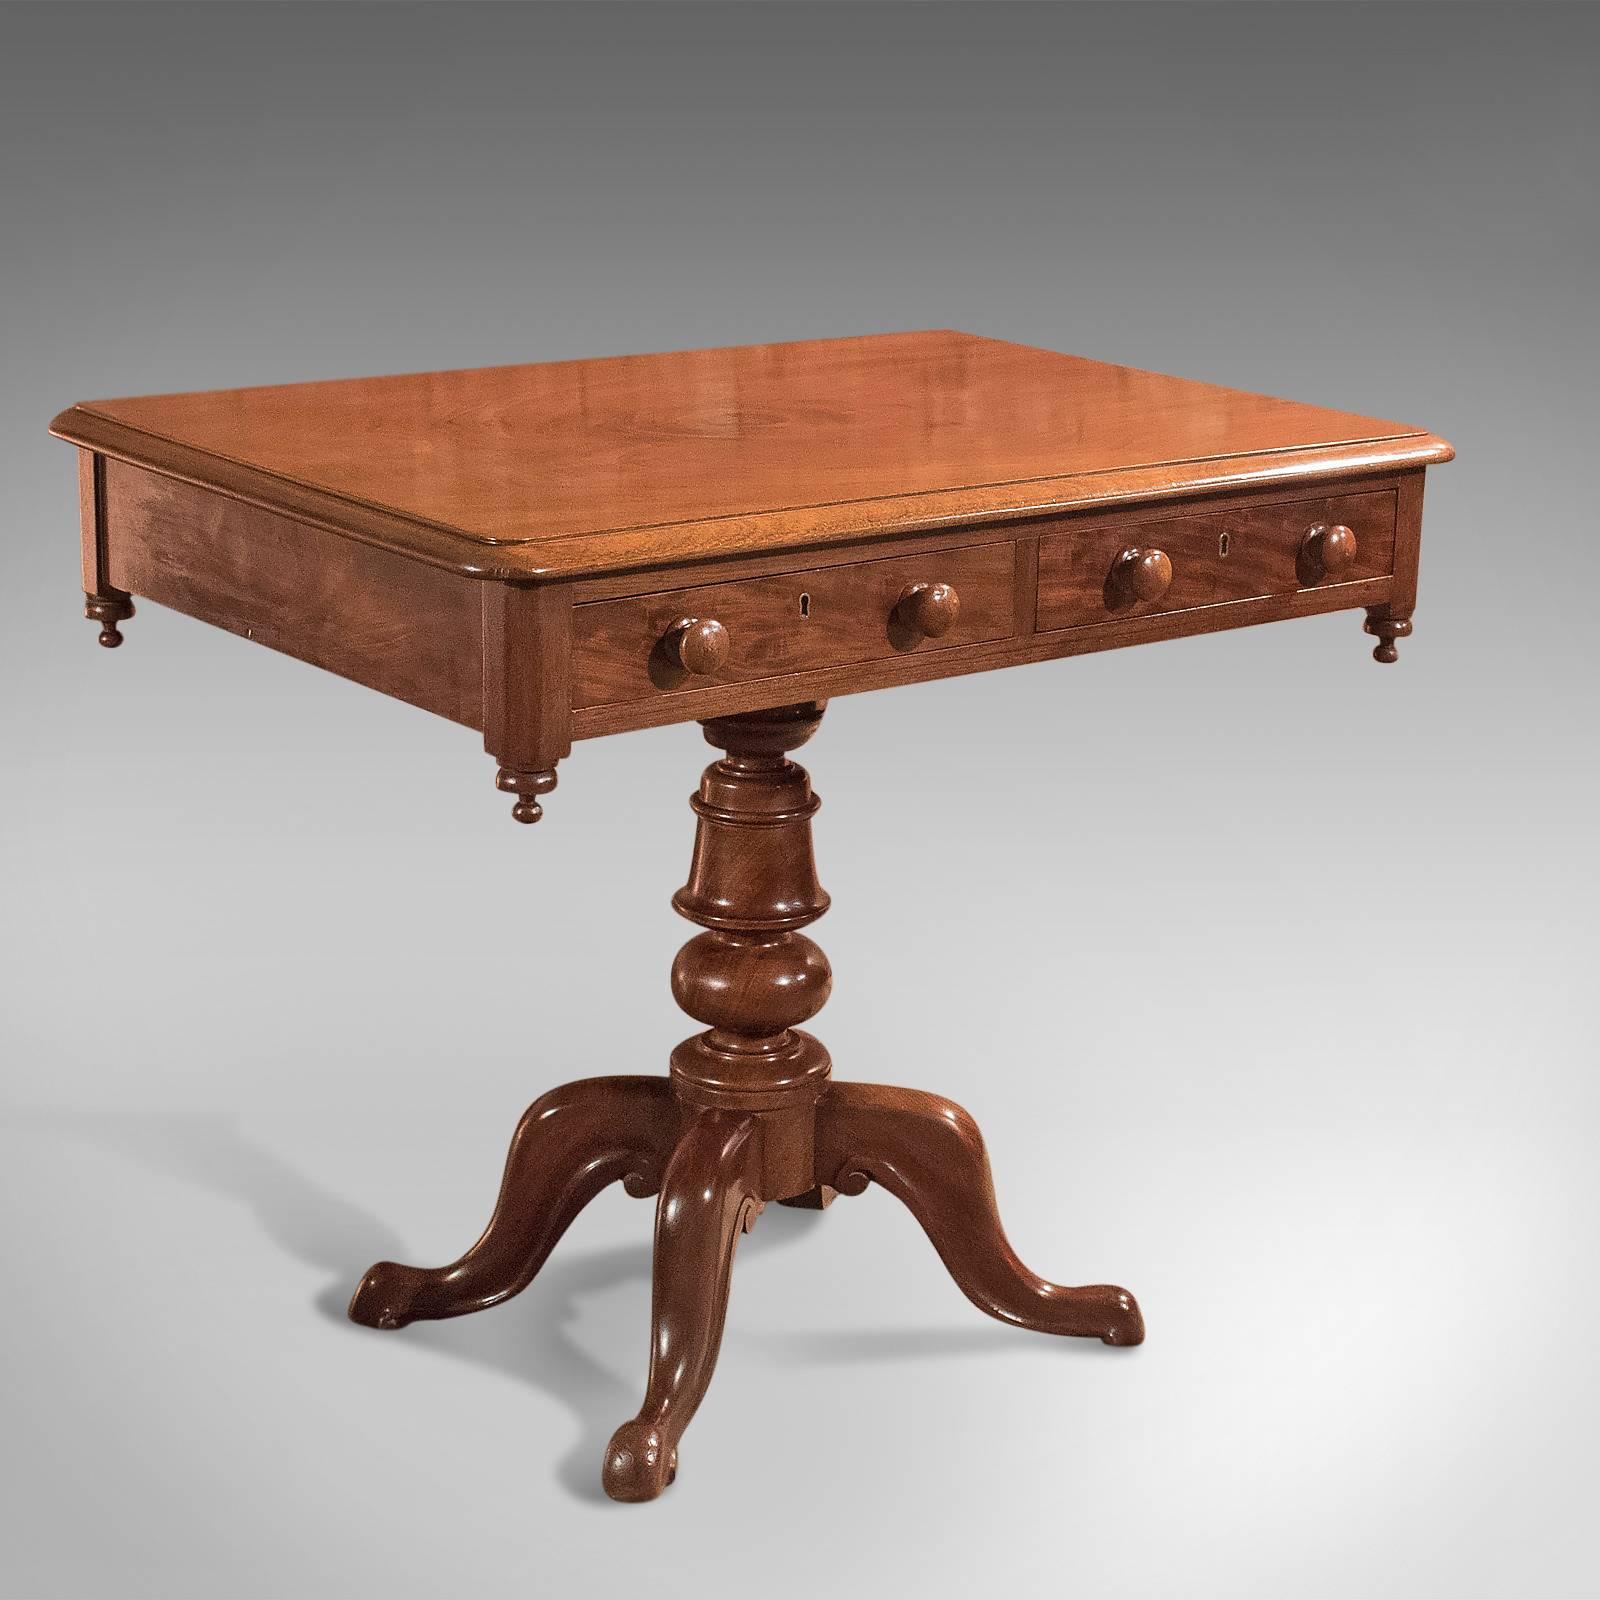 This is a fine, mid-sized side table dating to the Victorian period, circa 1880.

Beautiful grain detail to the polished, light mahogany finish.
Broad top with moulded edge detail.
Frieze in good proportion dressed with descending finials to